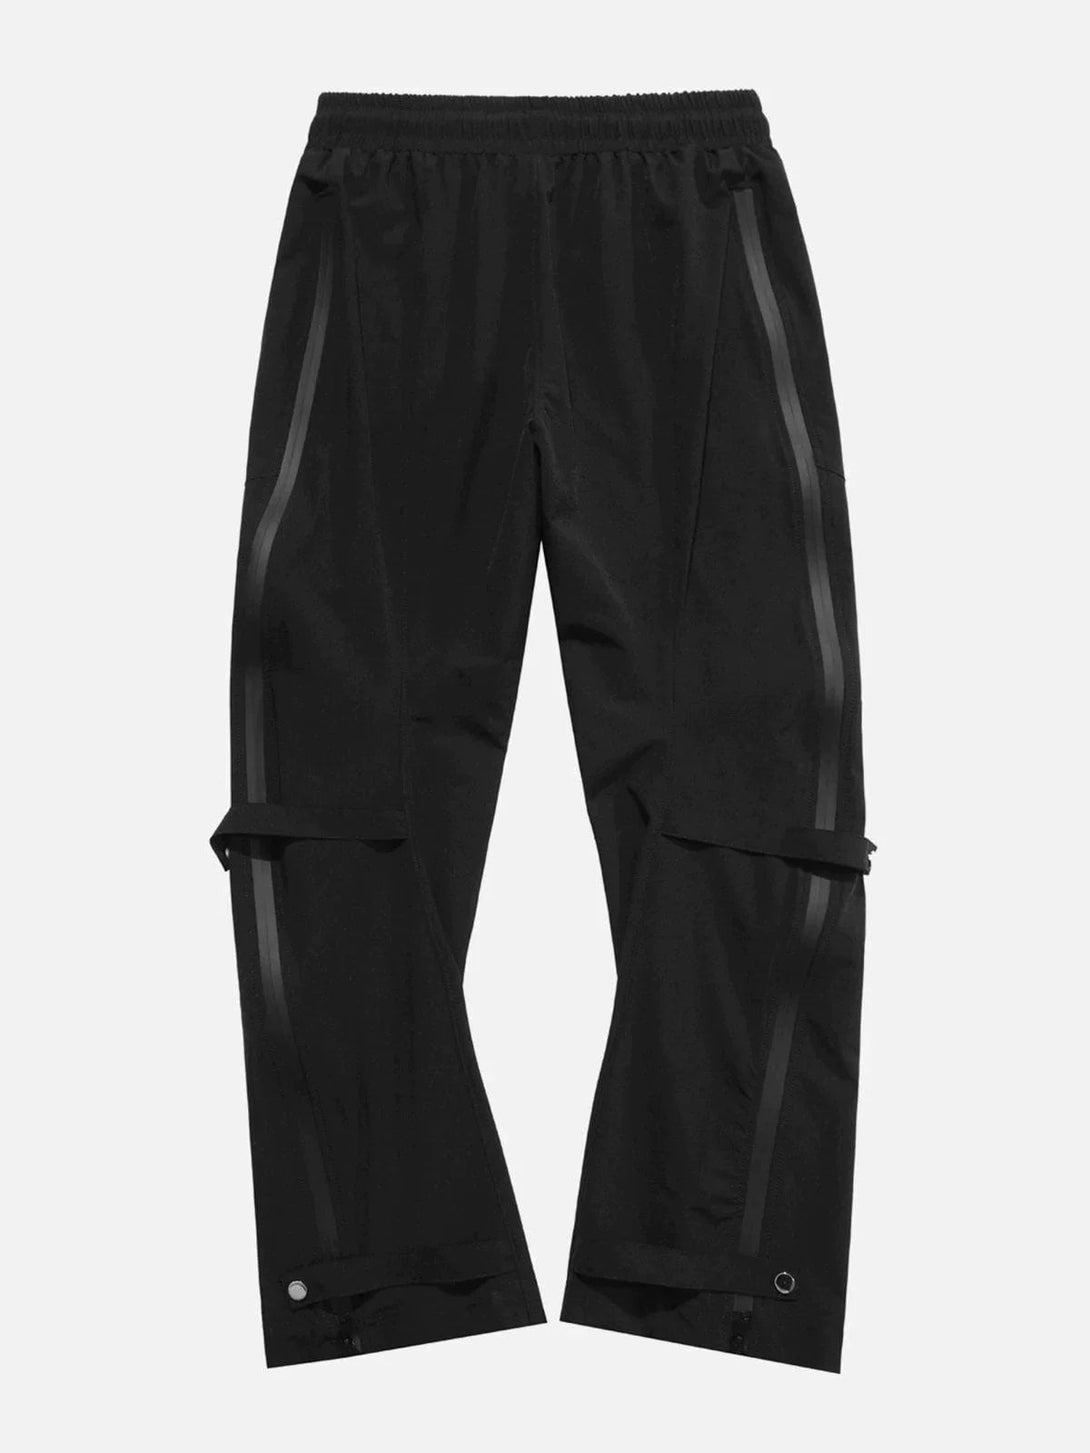 Majesda® - Outdoor Functional Side Zip Pants outfit ideas streetwear fashion